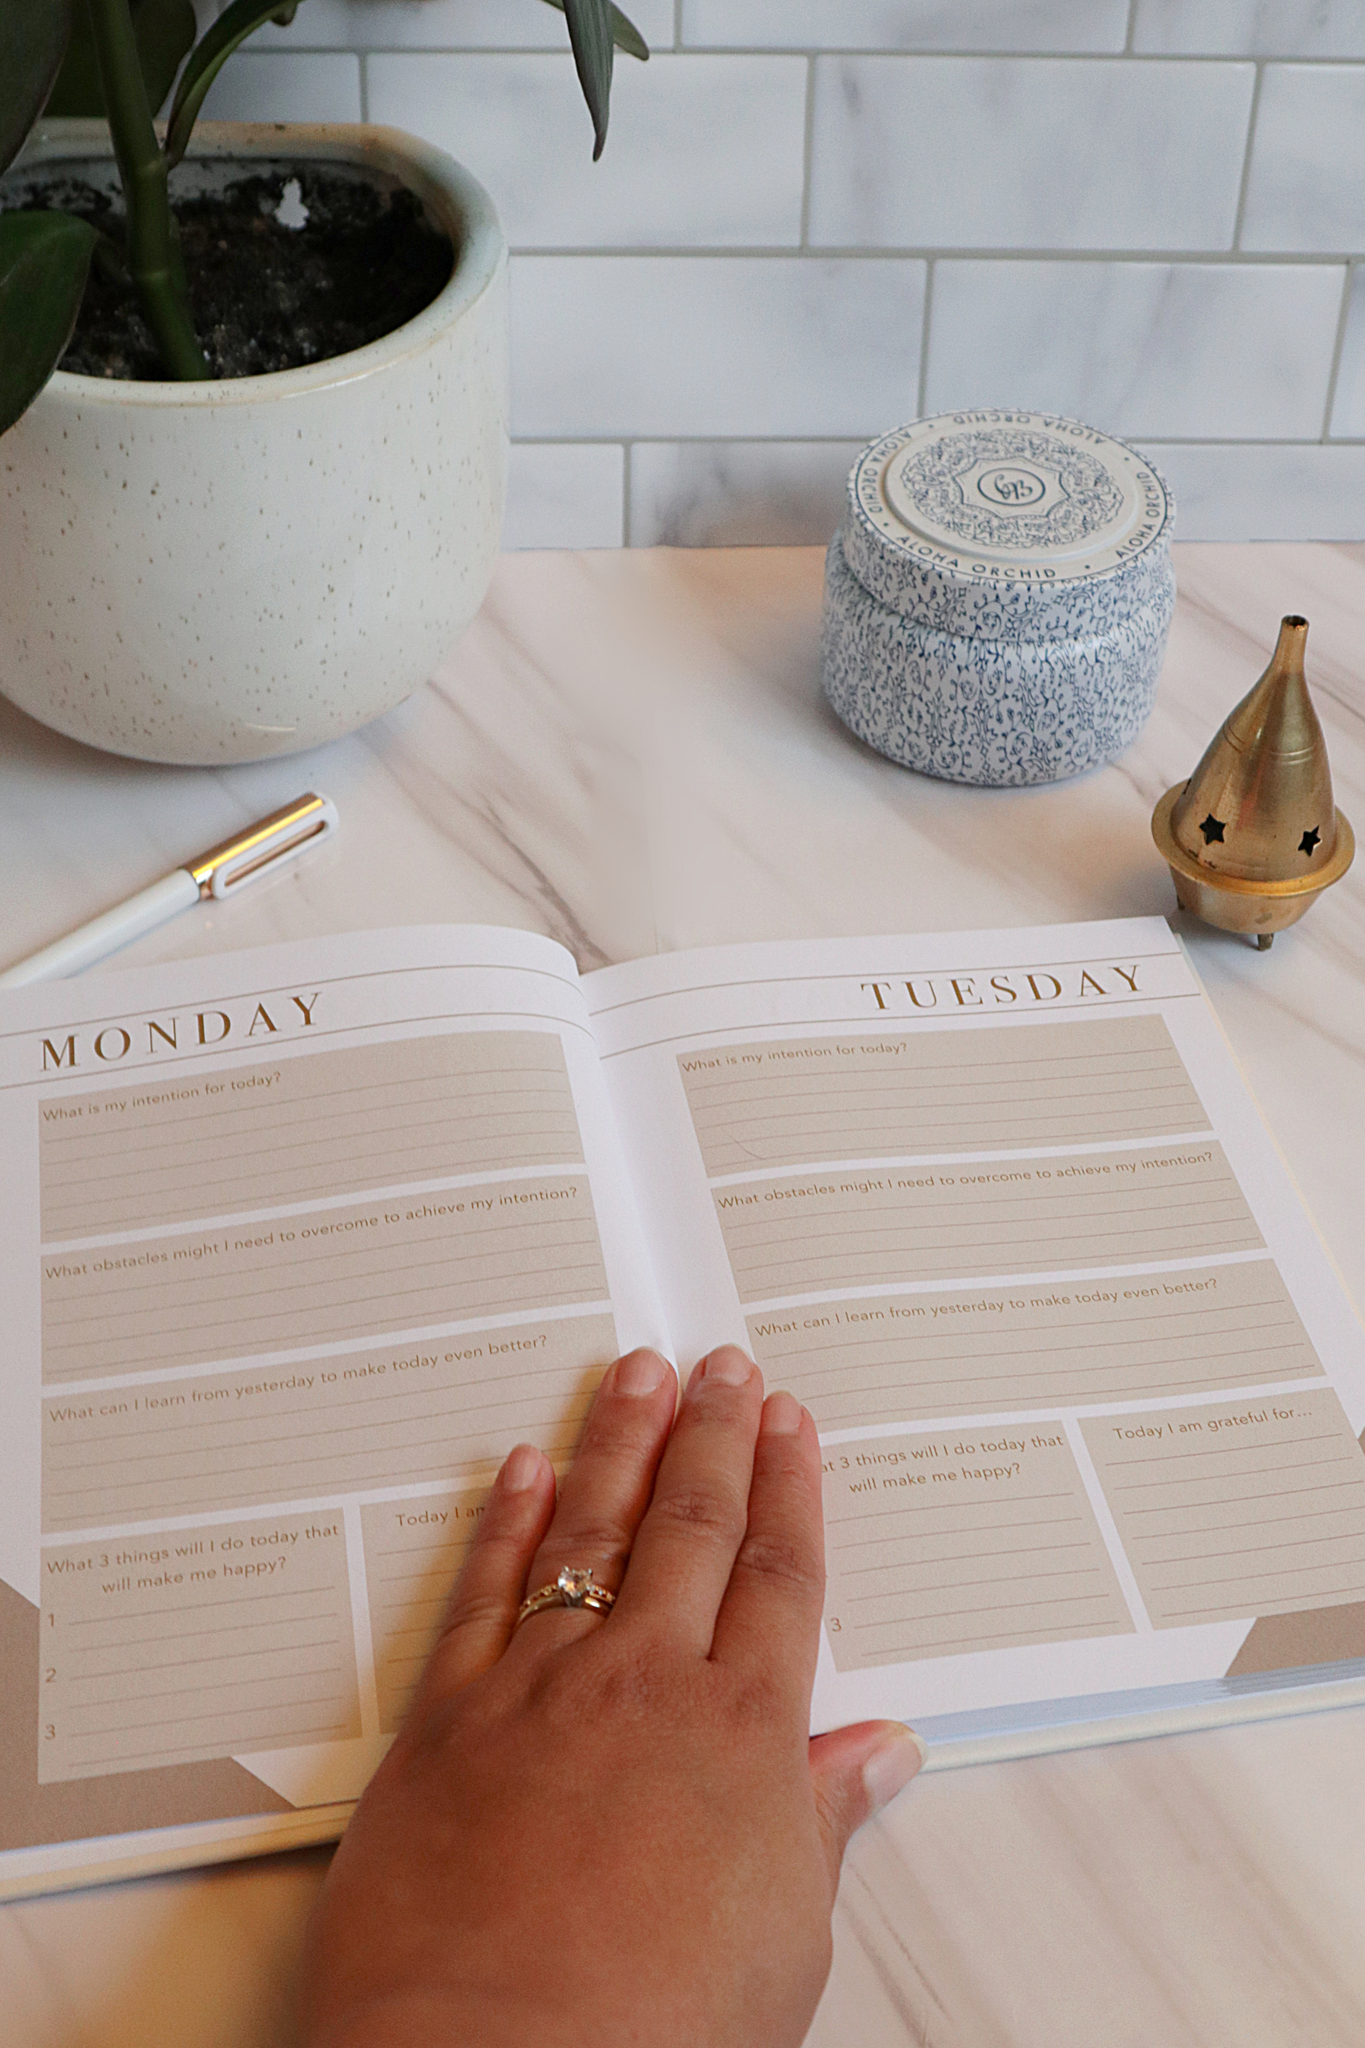 Morning Notes - Daily Wellbeing Journal